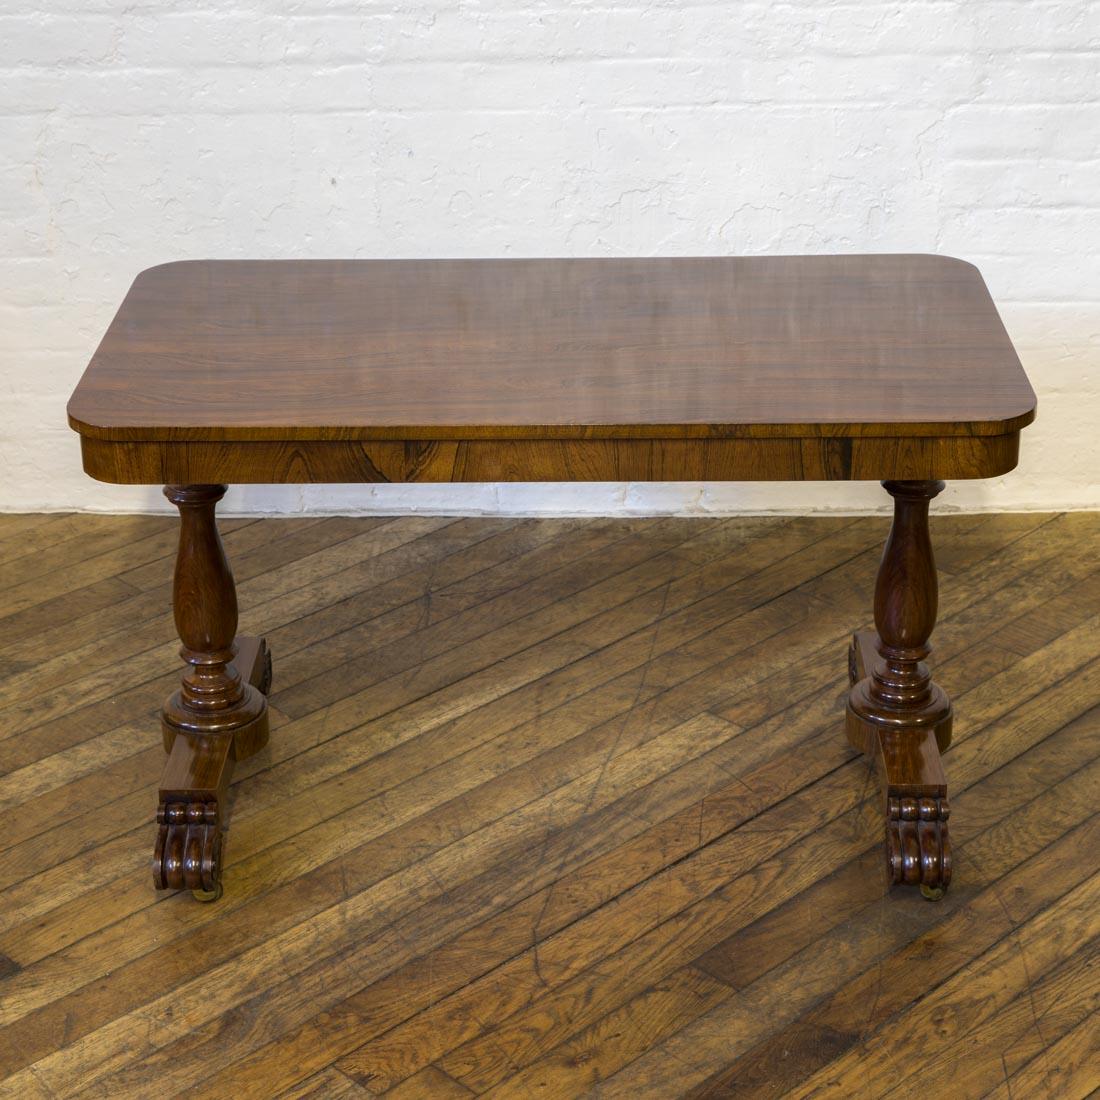 A lovely small rosewood library table from the William 4th period. With typical carved and scrolled feet and turned end supports and original working brass castors. The top was re-polished about 10 years ago and is still in excellent condition.